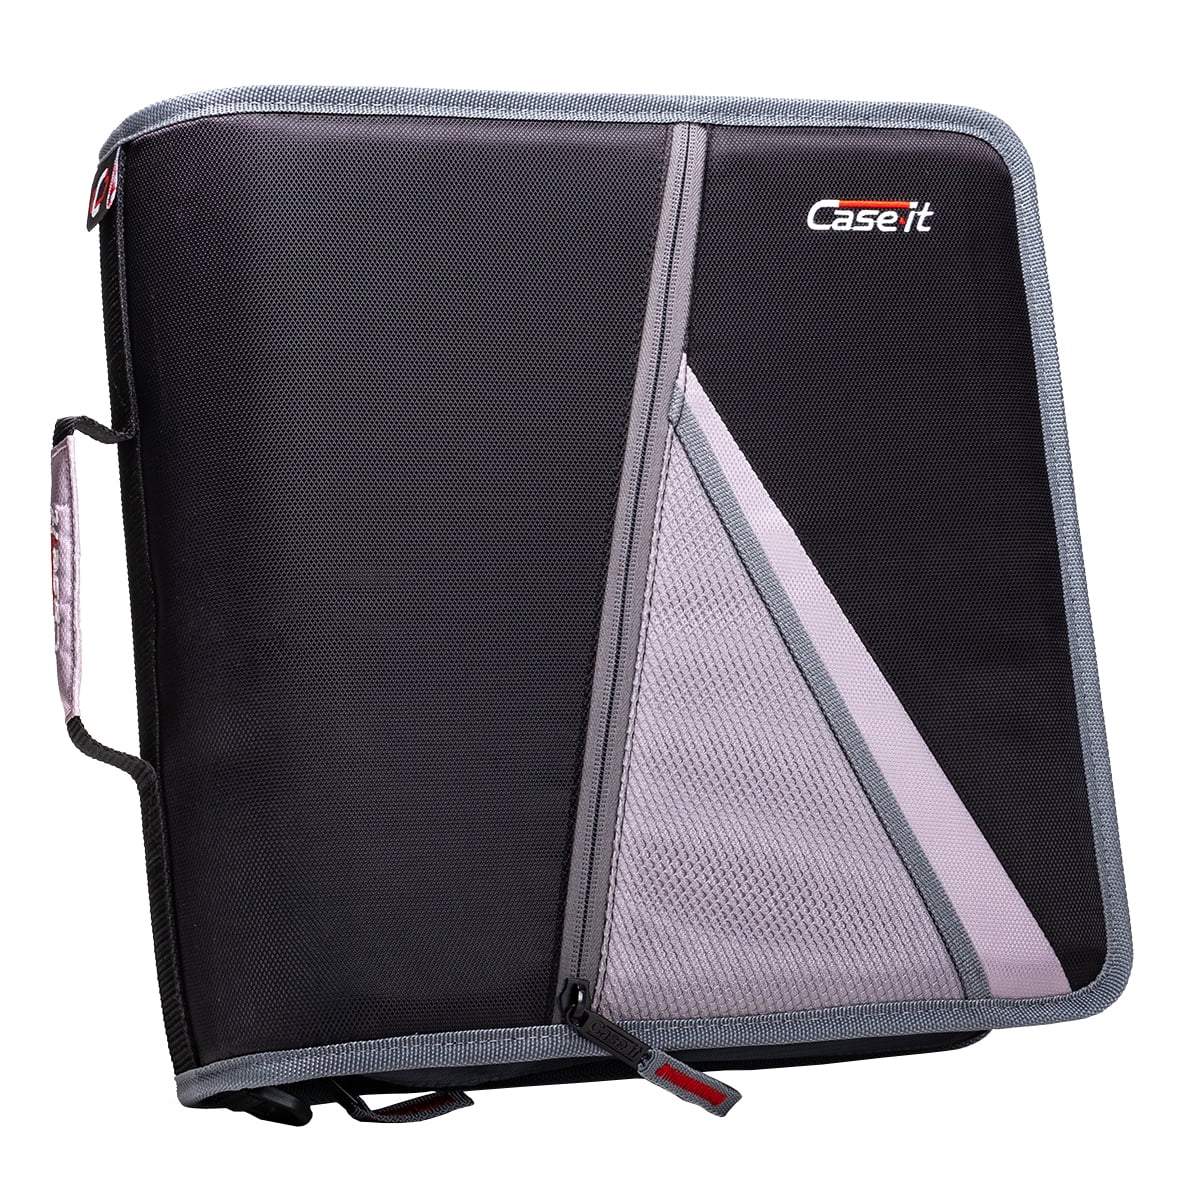 Case it Mighty Zip Tab 3 O Ring Binder with Expanding File Folder Black assembled product height 13 11 X 12 75 W X 3 74 L 4393c35e e3f0 41d5 8c89 6986f870749c.f58107de40c51c008149b139ed1158f1